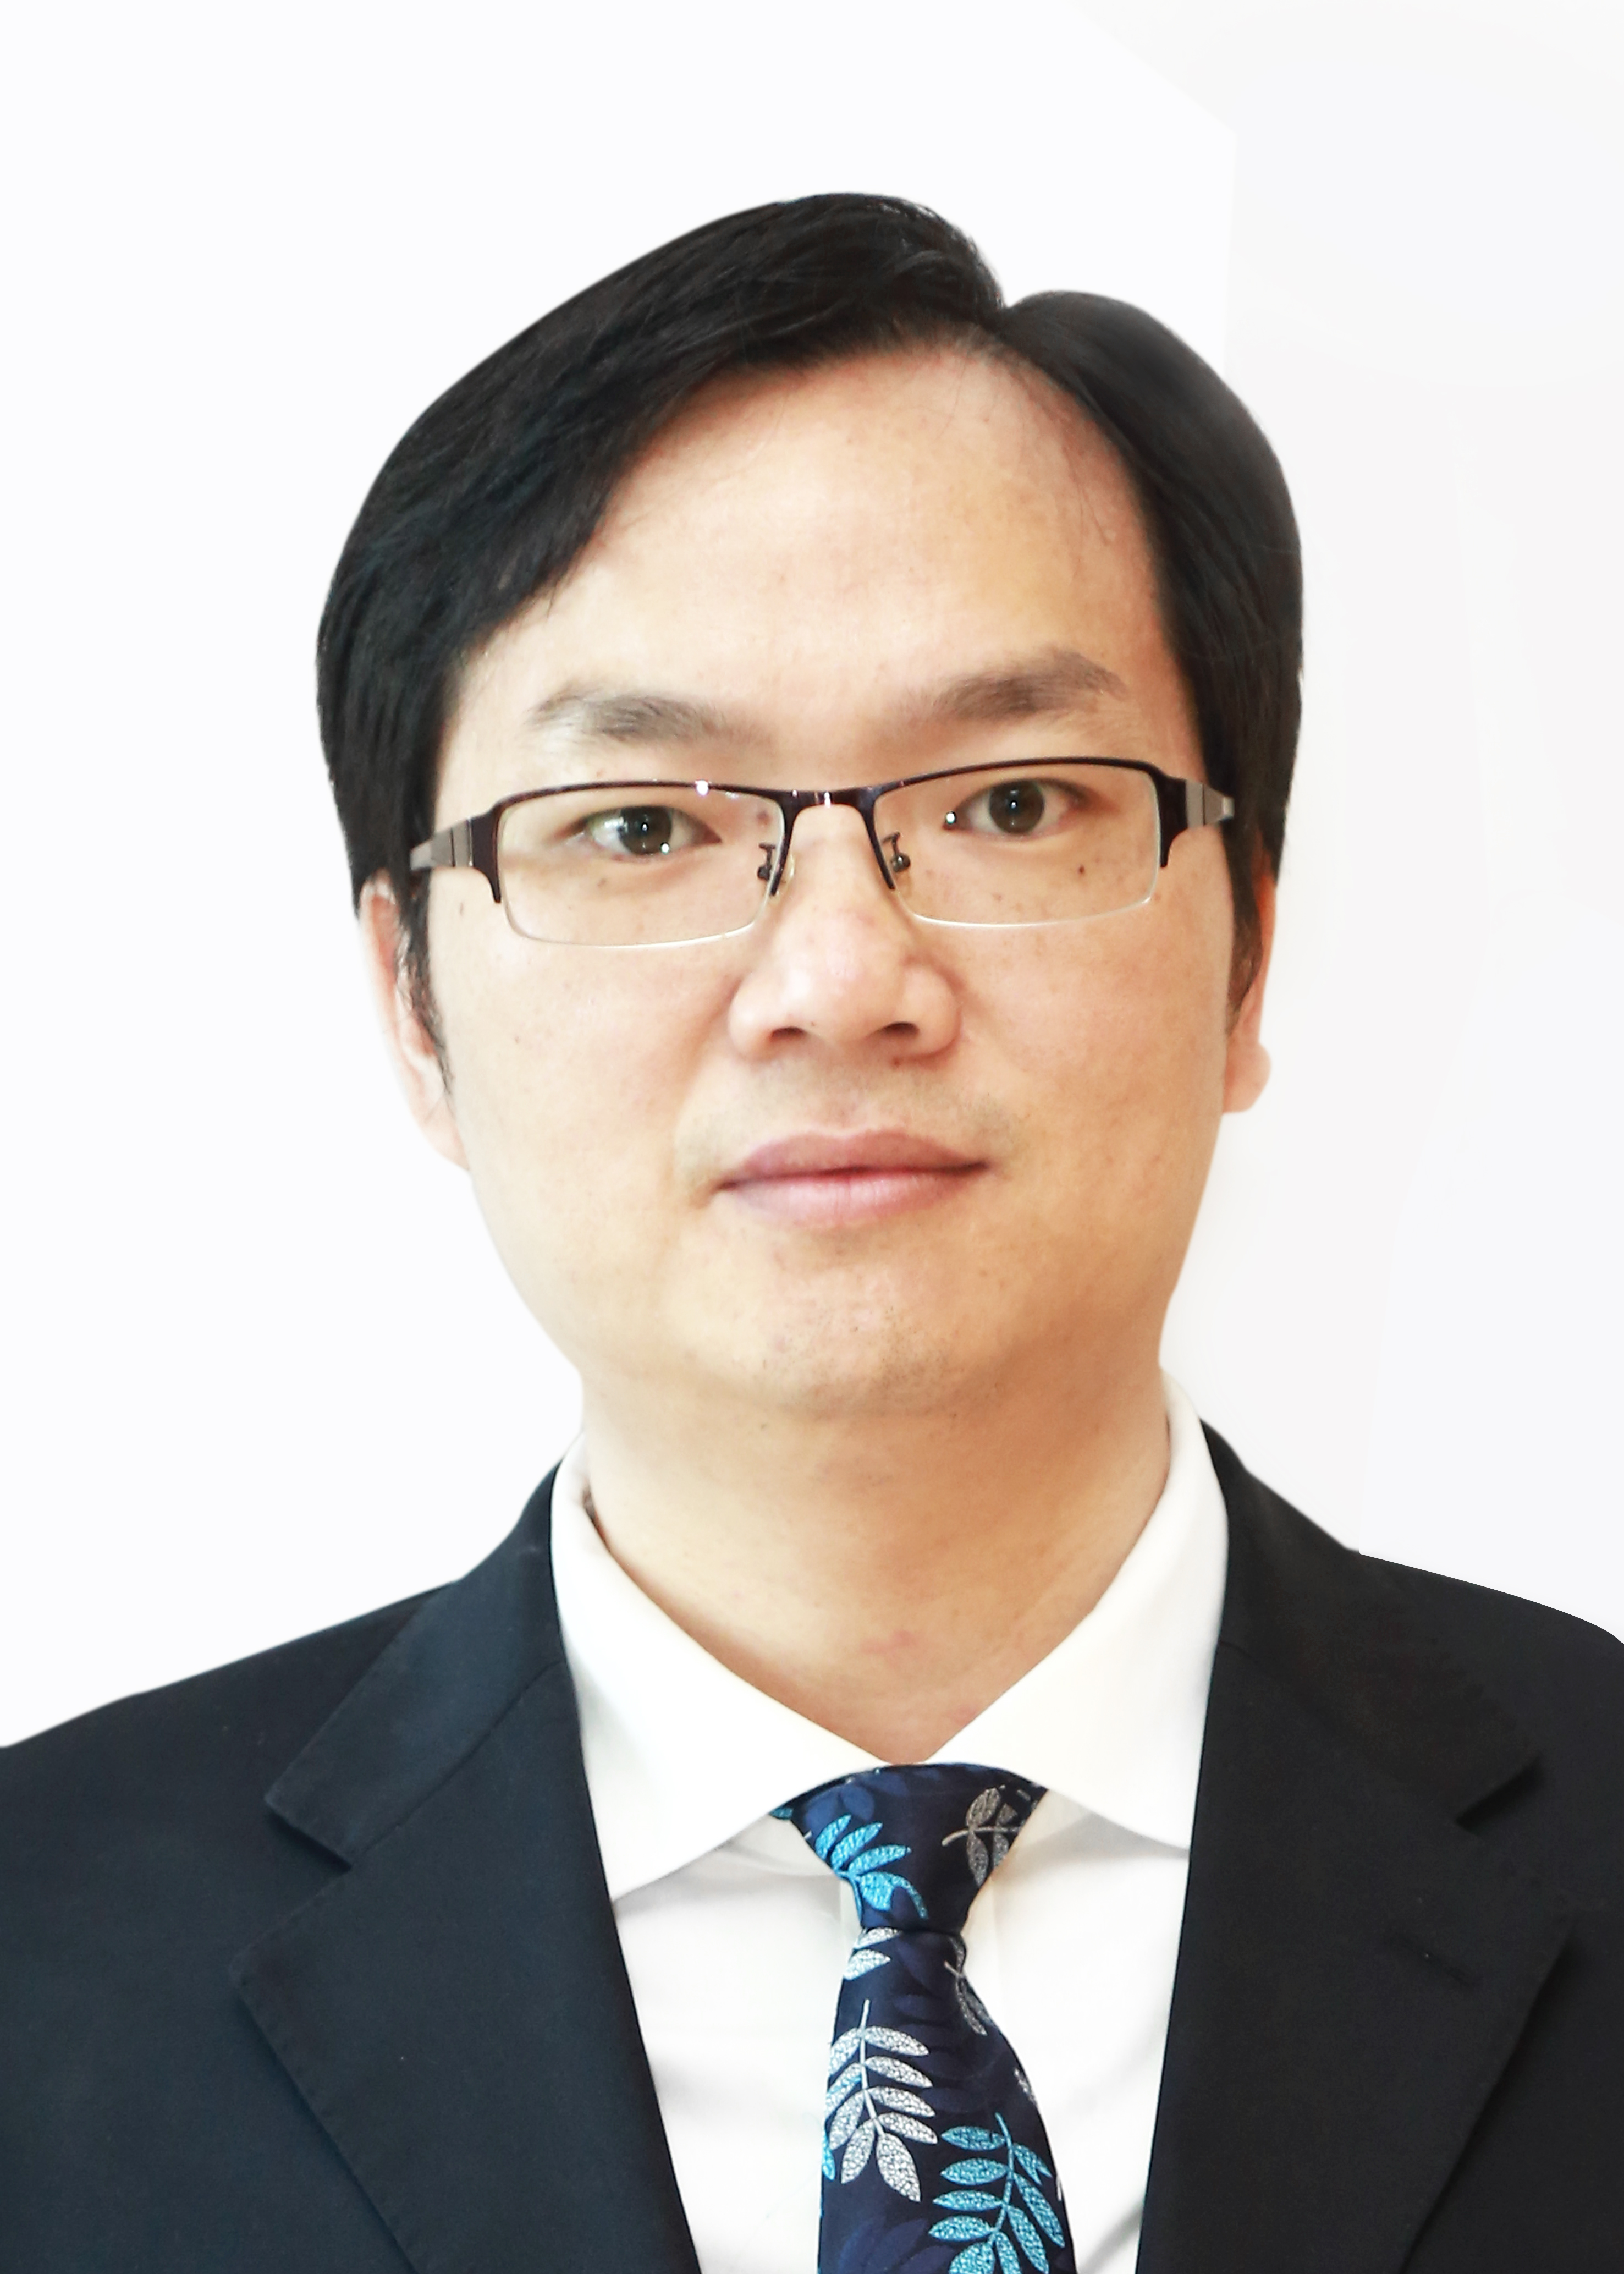 Dr Chuanwu Xiong is the CEO of Integrated Quality Consulting